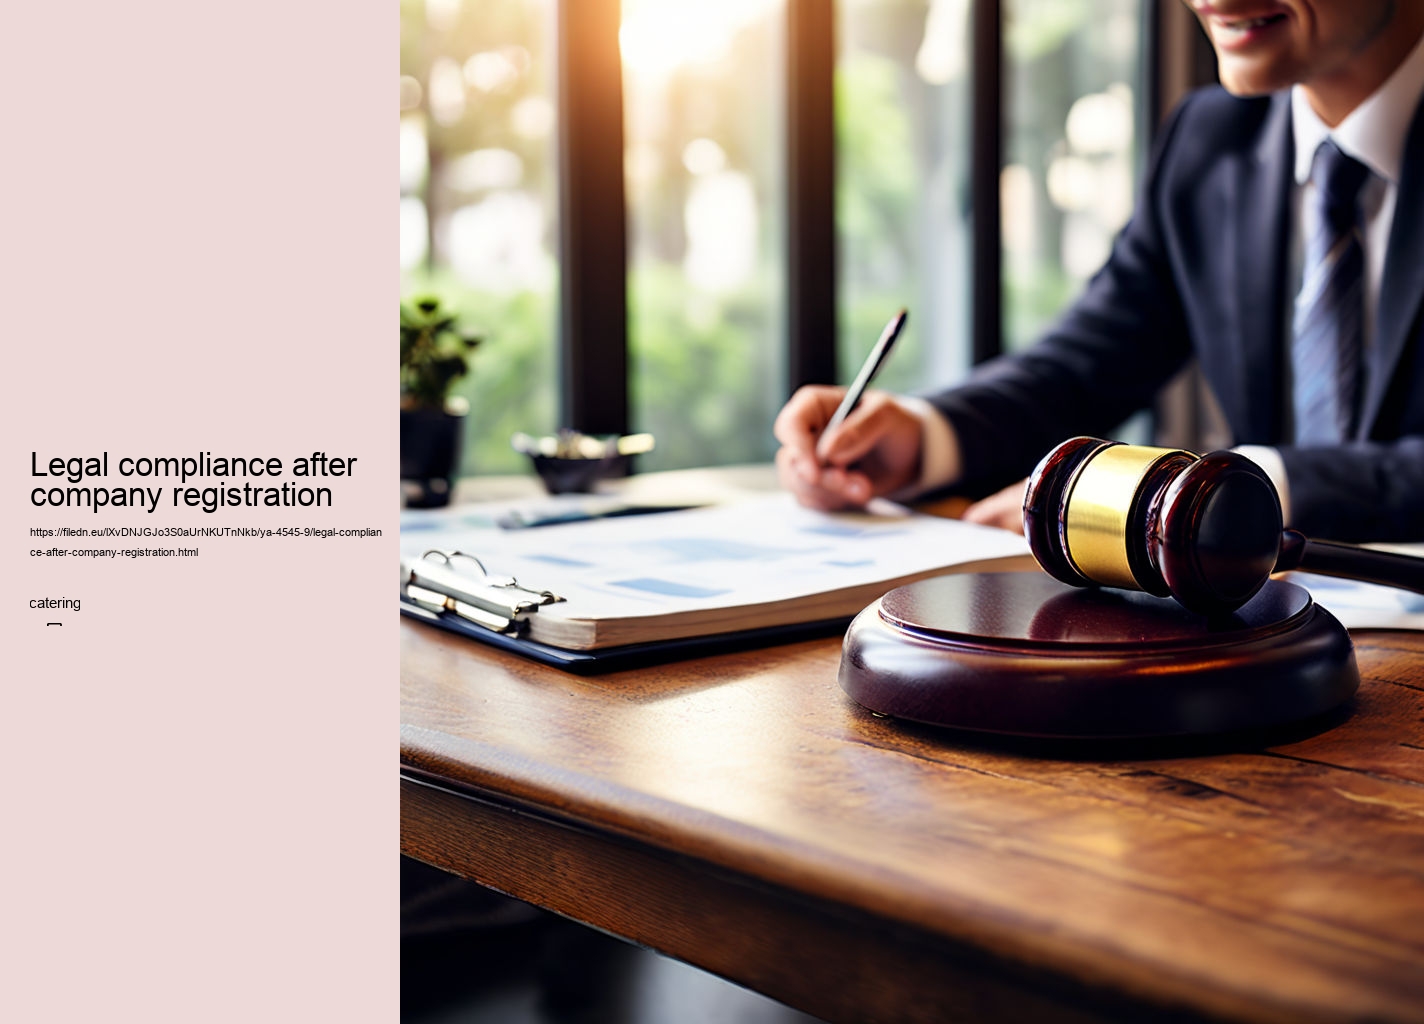 Legal compliance after company registration